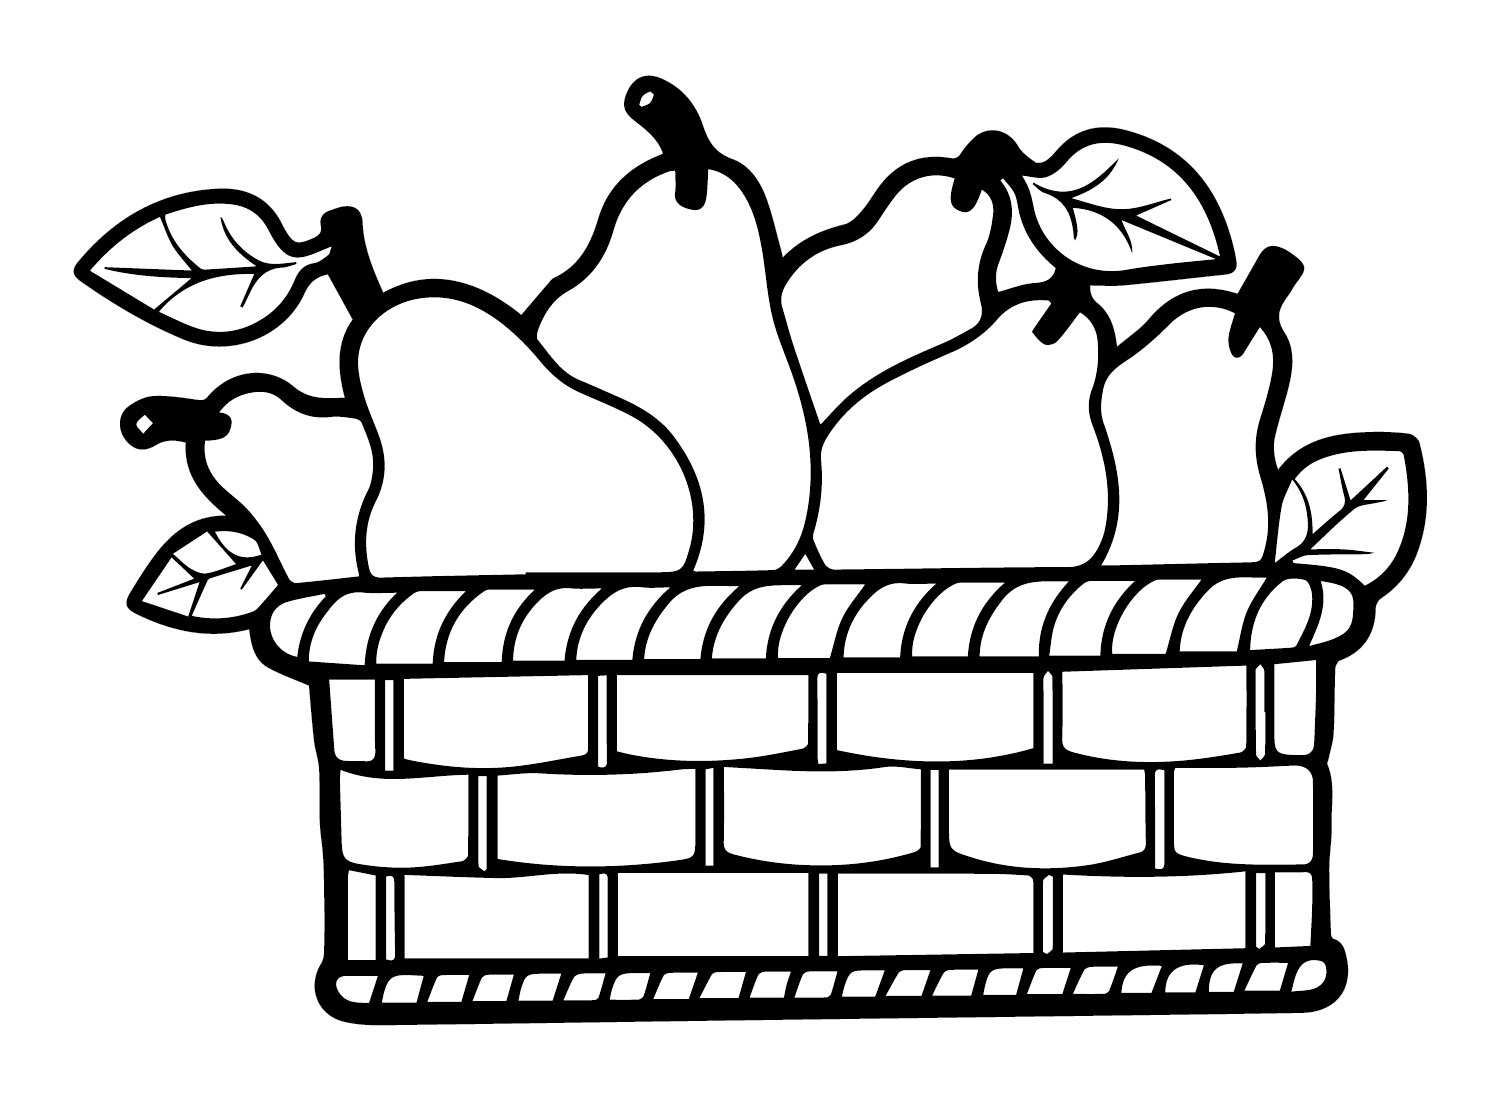 Basket of Pears Coloring Page